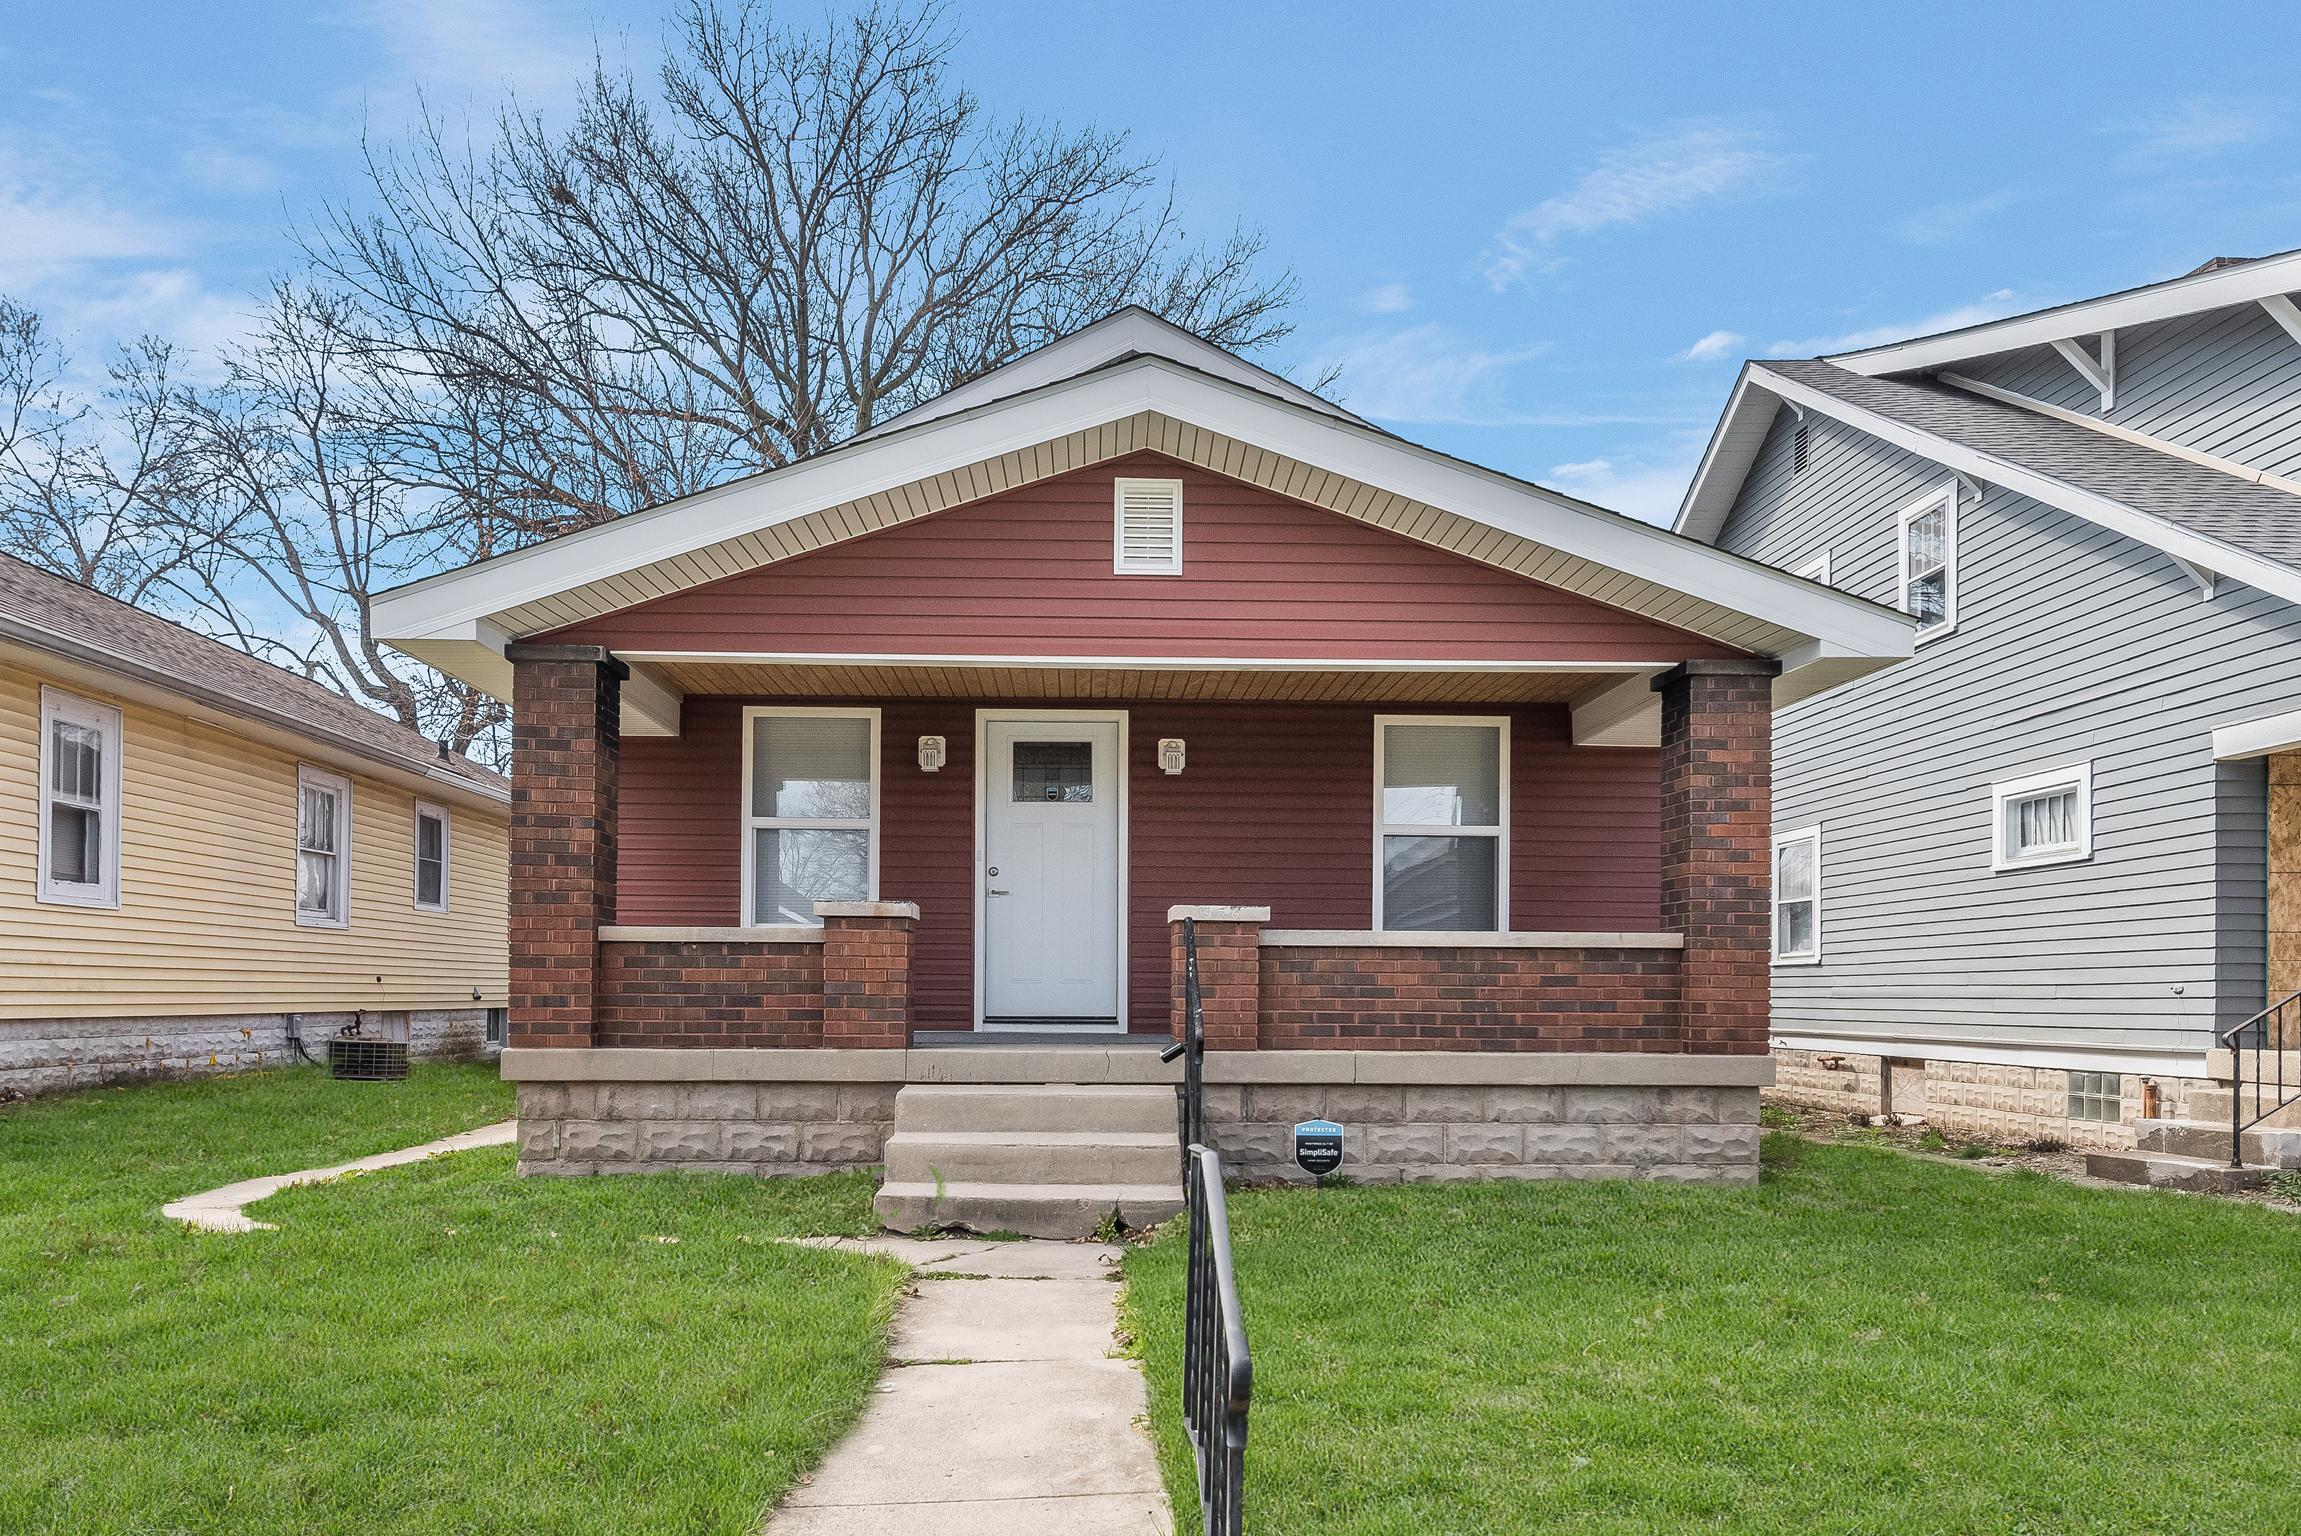 Photo one of 956 N Chester Ave Indianapolis IN 46201 | MLS 21971031